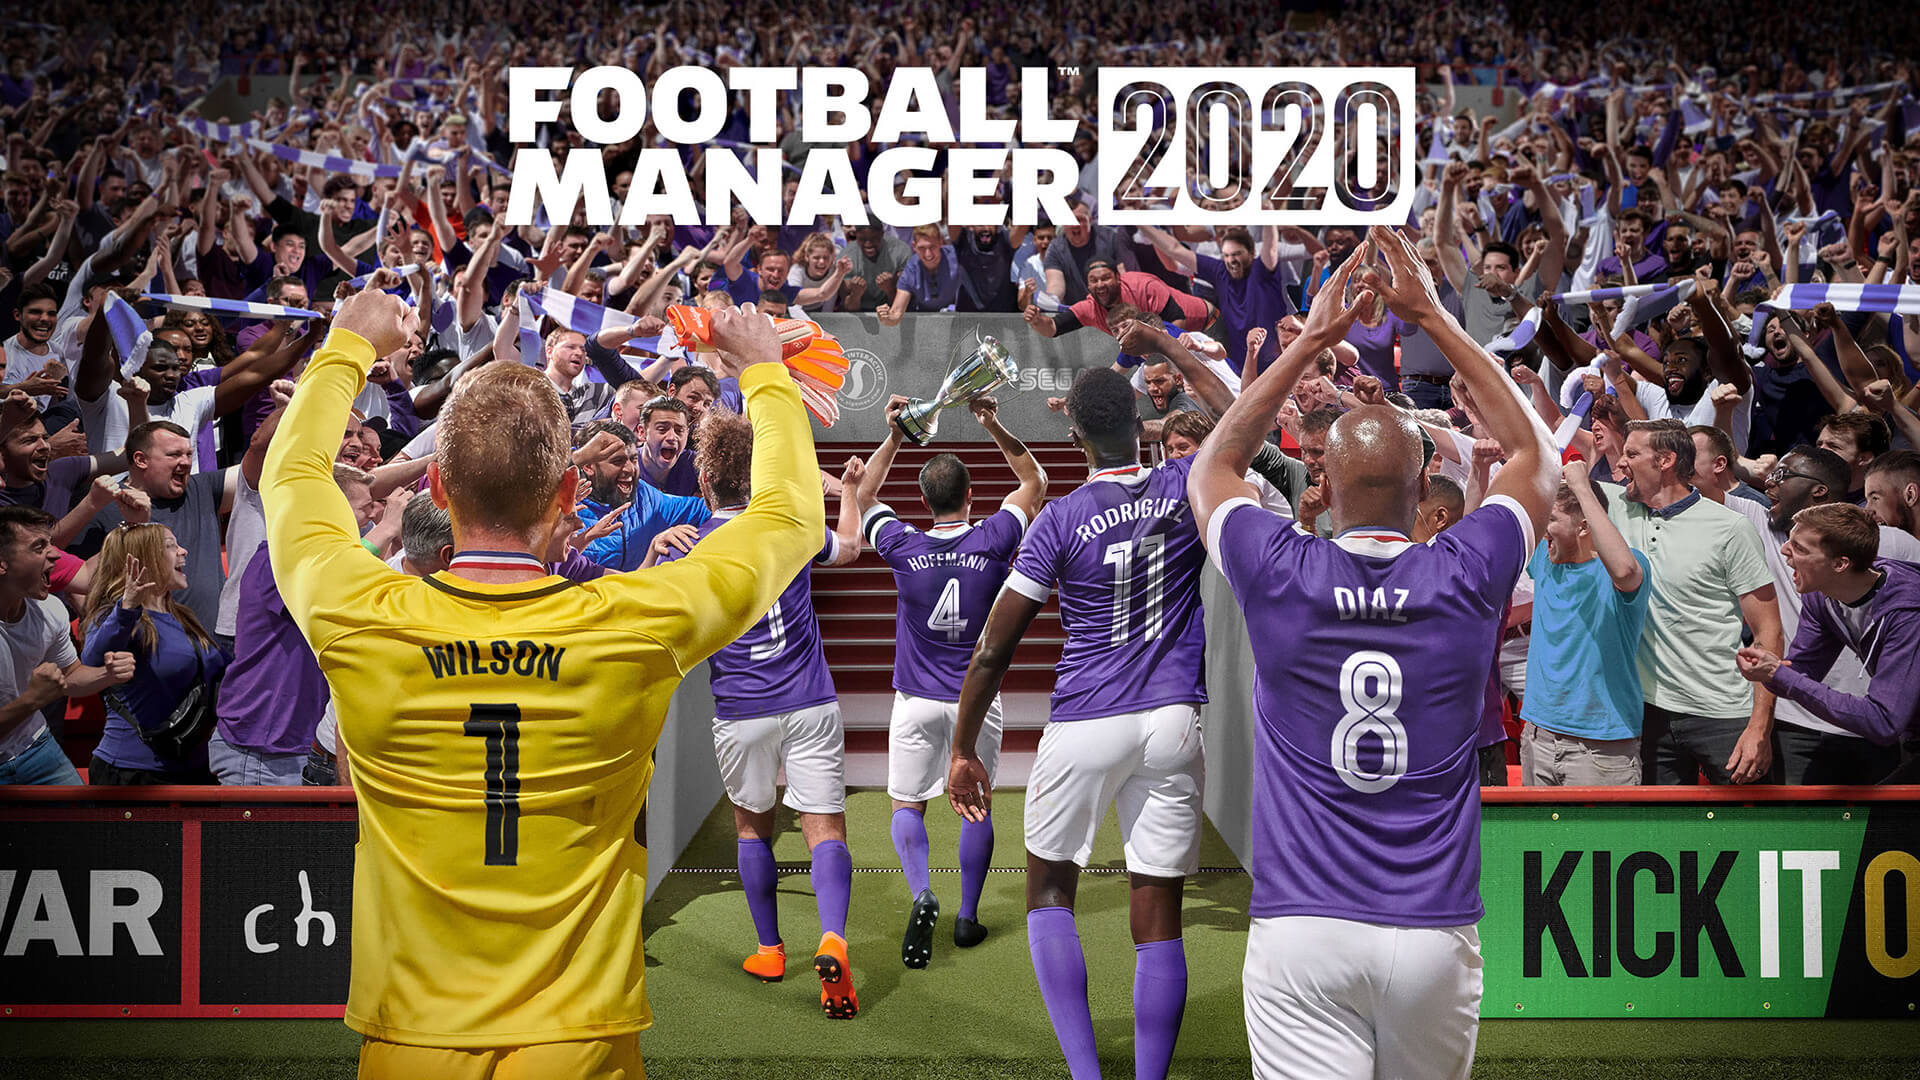 Football Manager 2020 free full pc game for Download